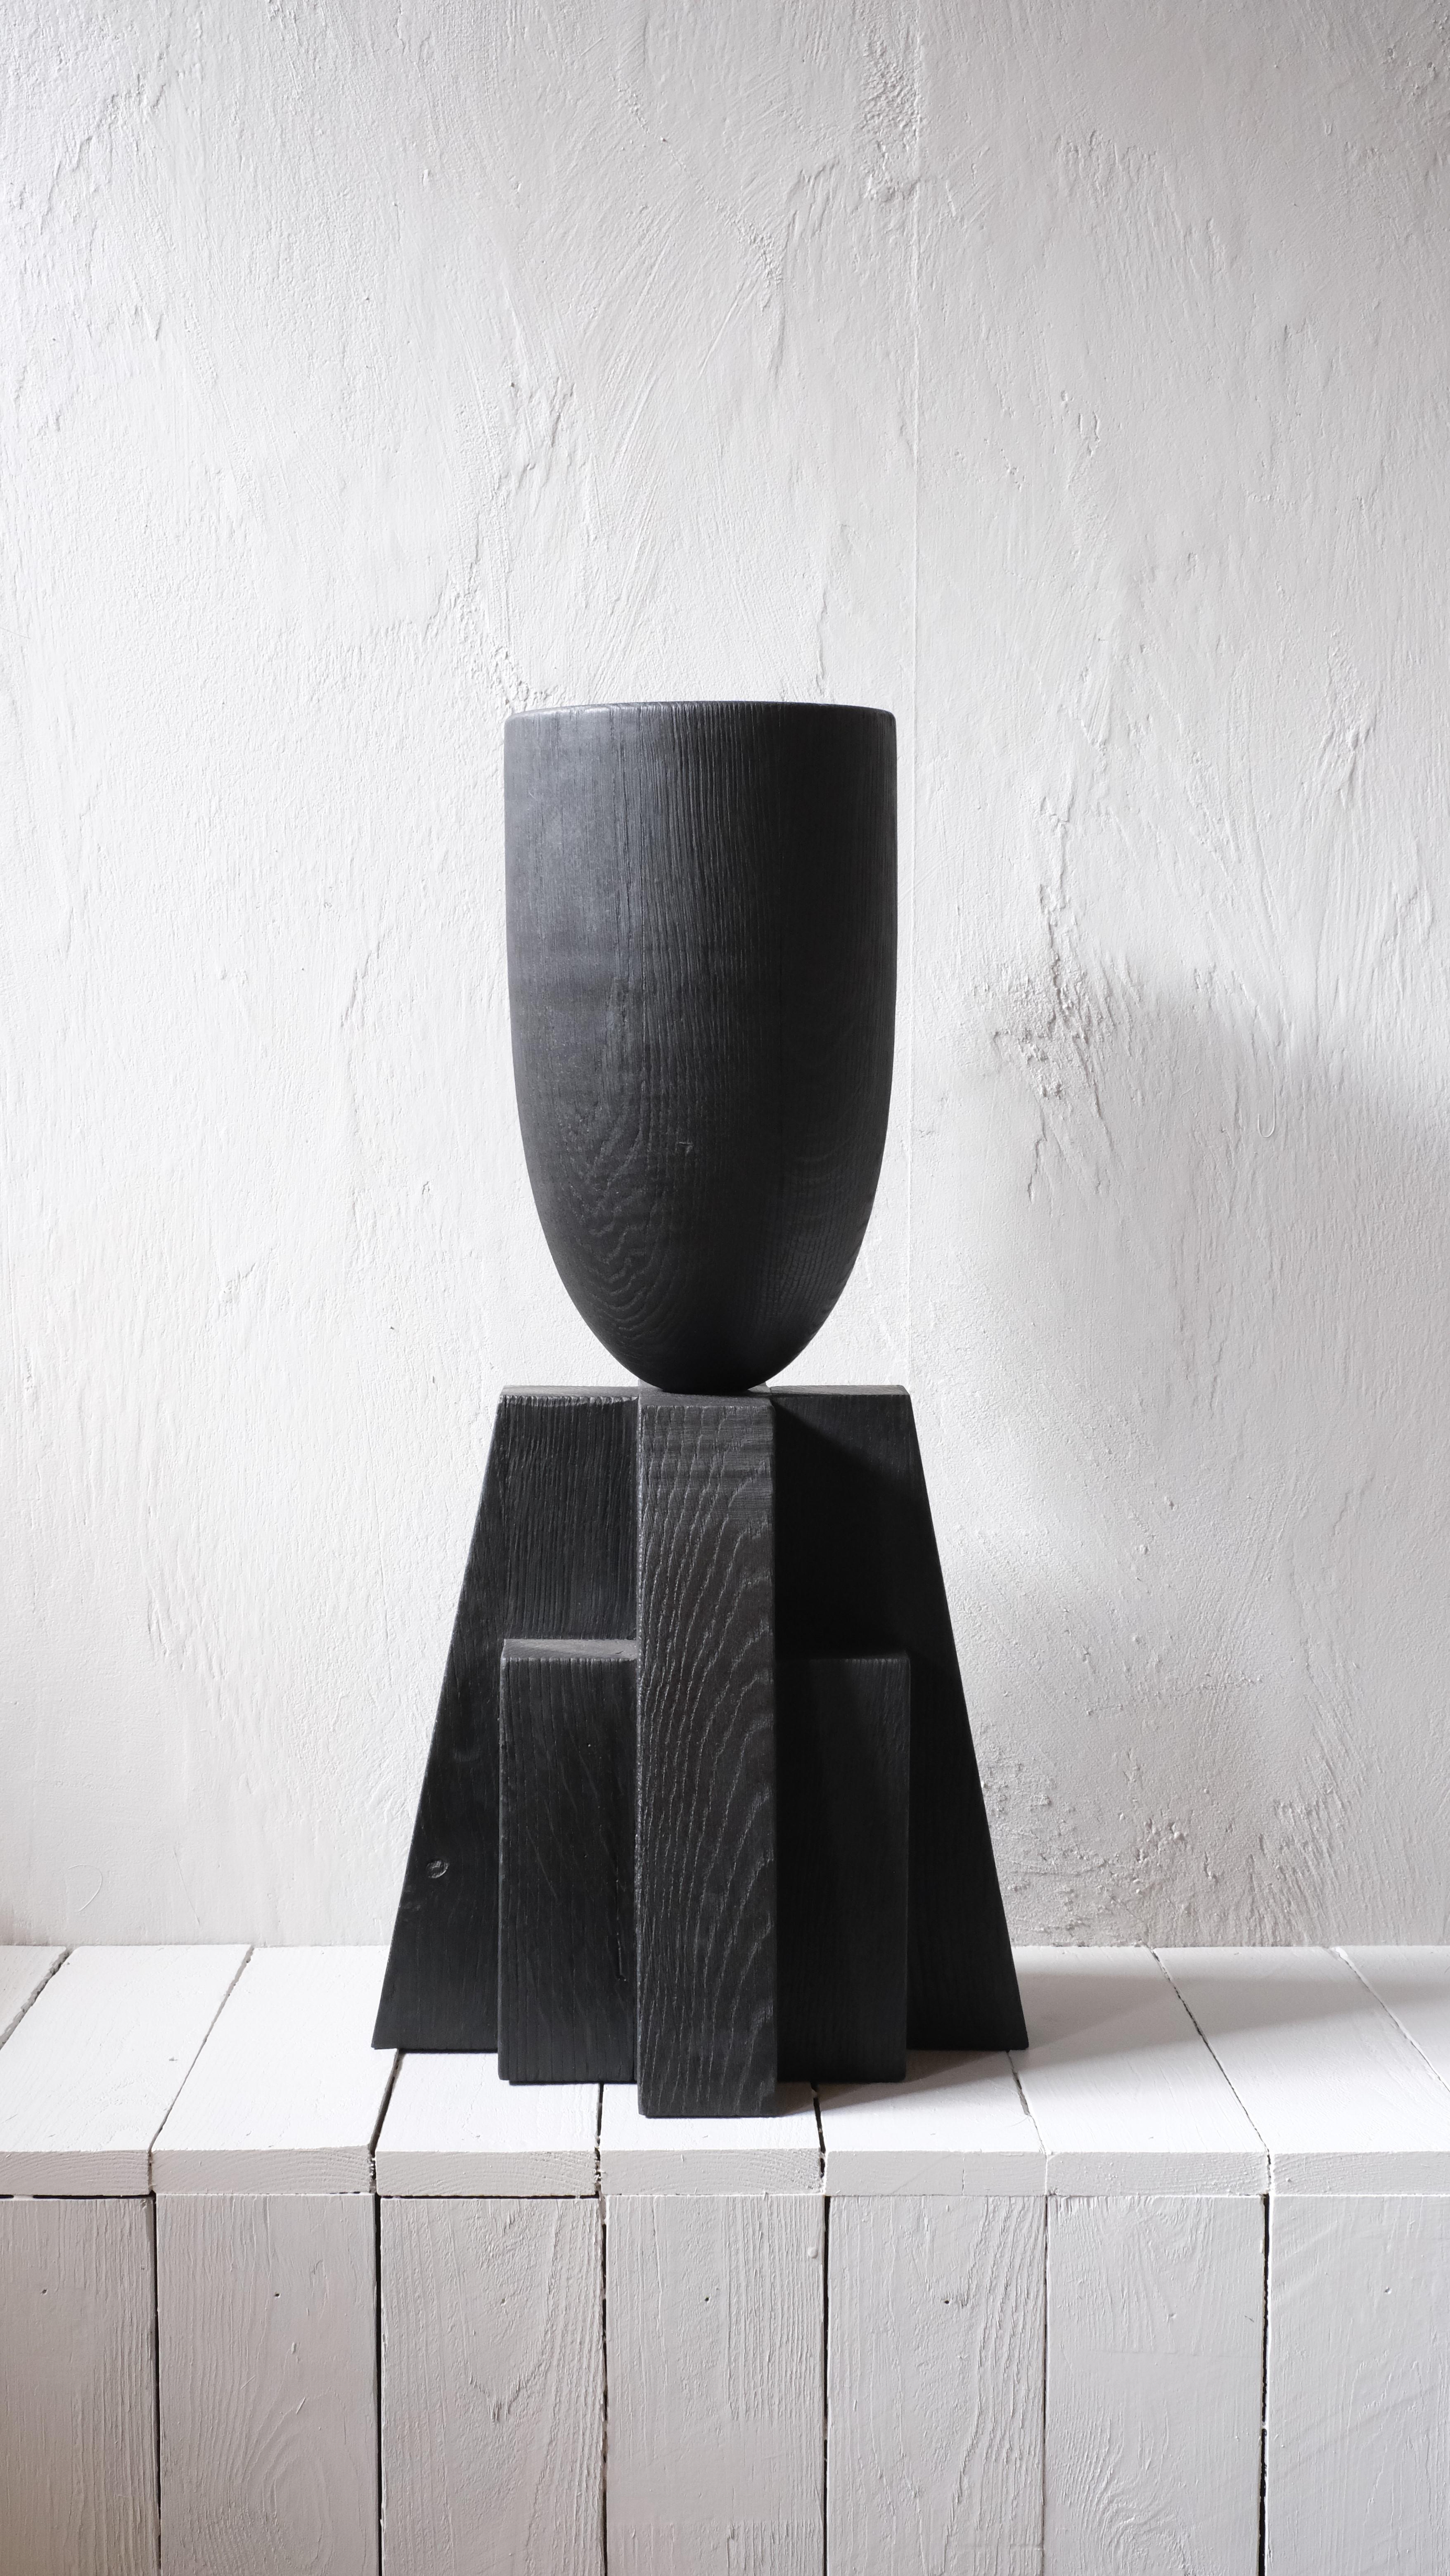 Babel vase by Arno Declercq
Dimensions: W 32 x L 32 x H 65 cm 
Materials: burned and waxed oak

Arno Declercq
Belgian designer and art dealer who makes bespoke objects with passion for design, atmosphere, history and craft. Arno grew up in a